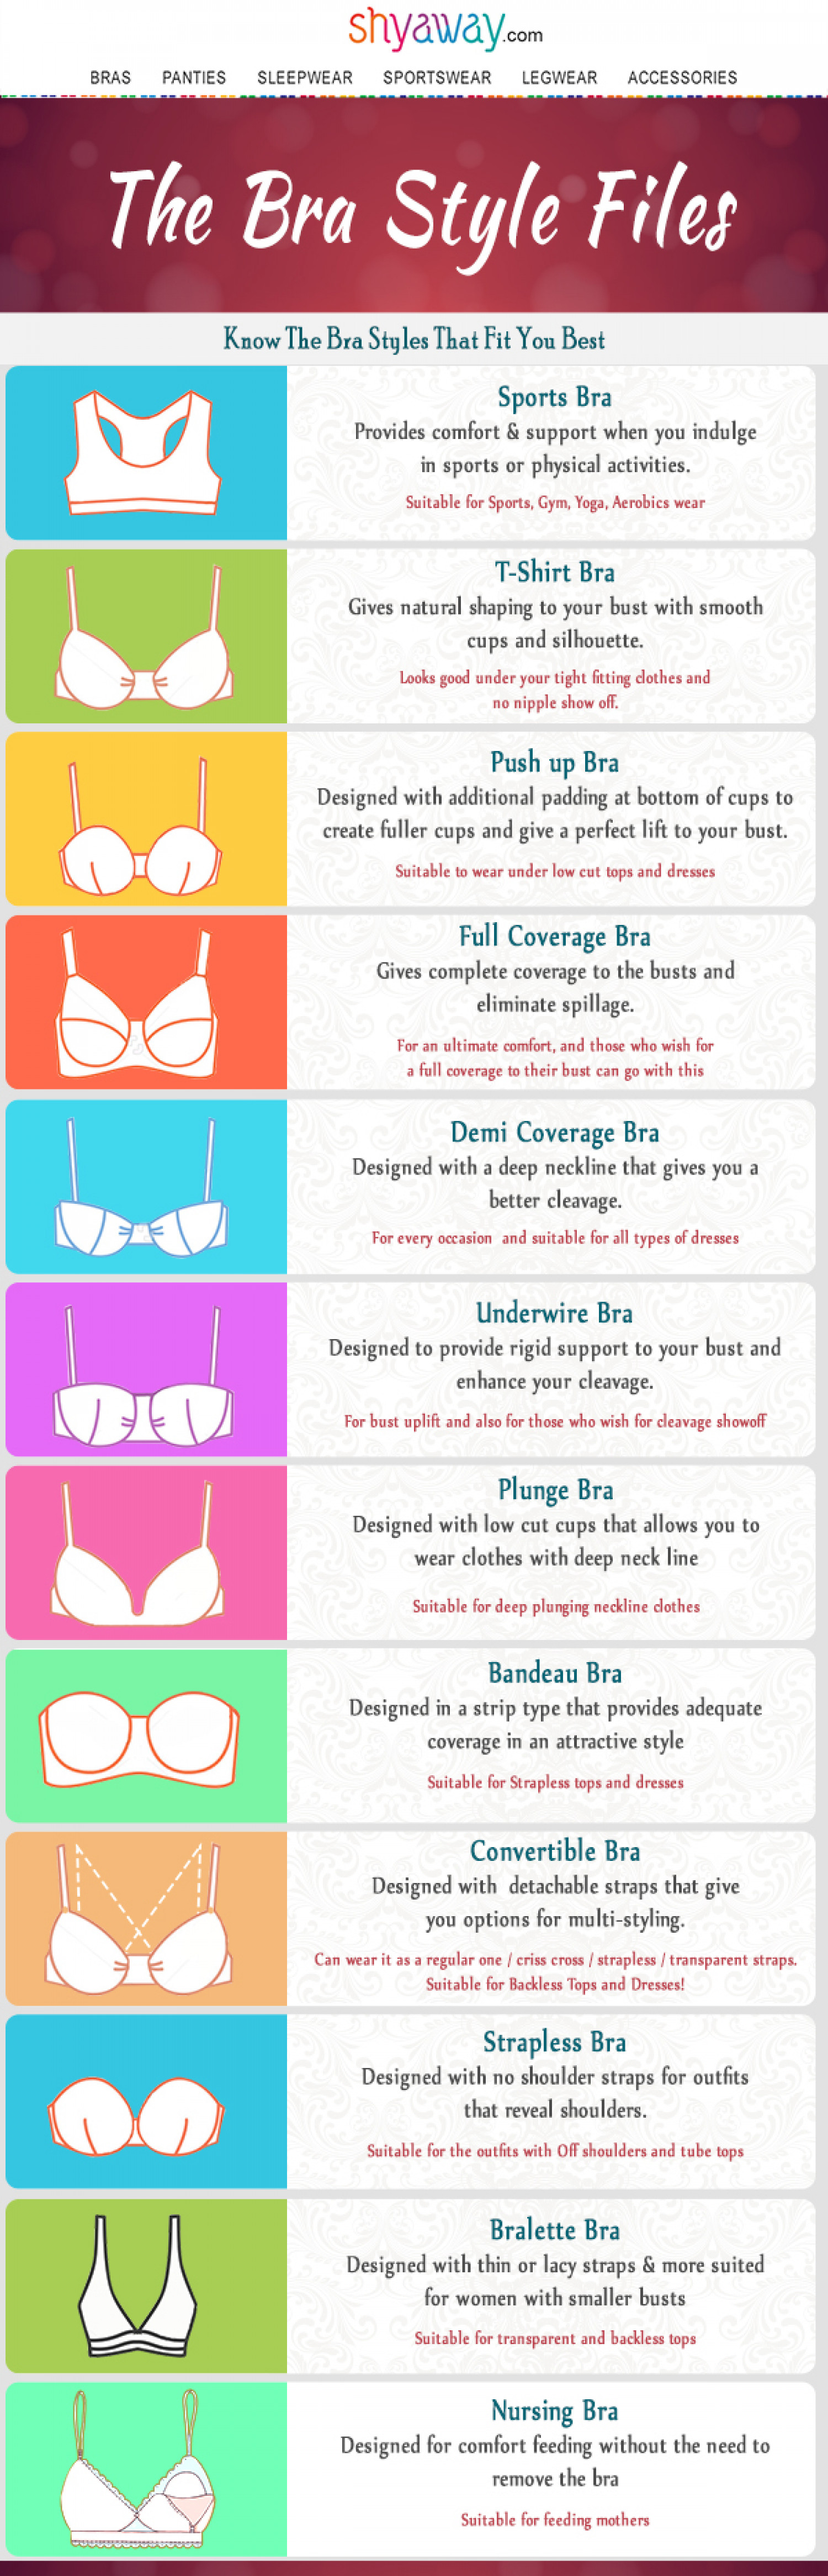 Know the bra style that fits you best Infographic